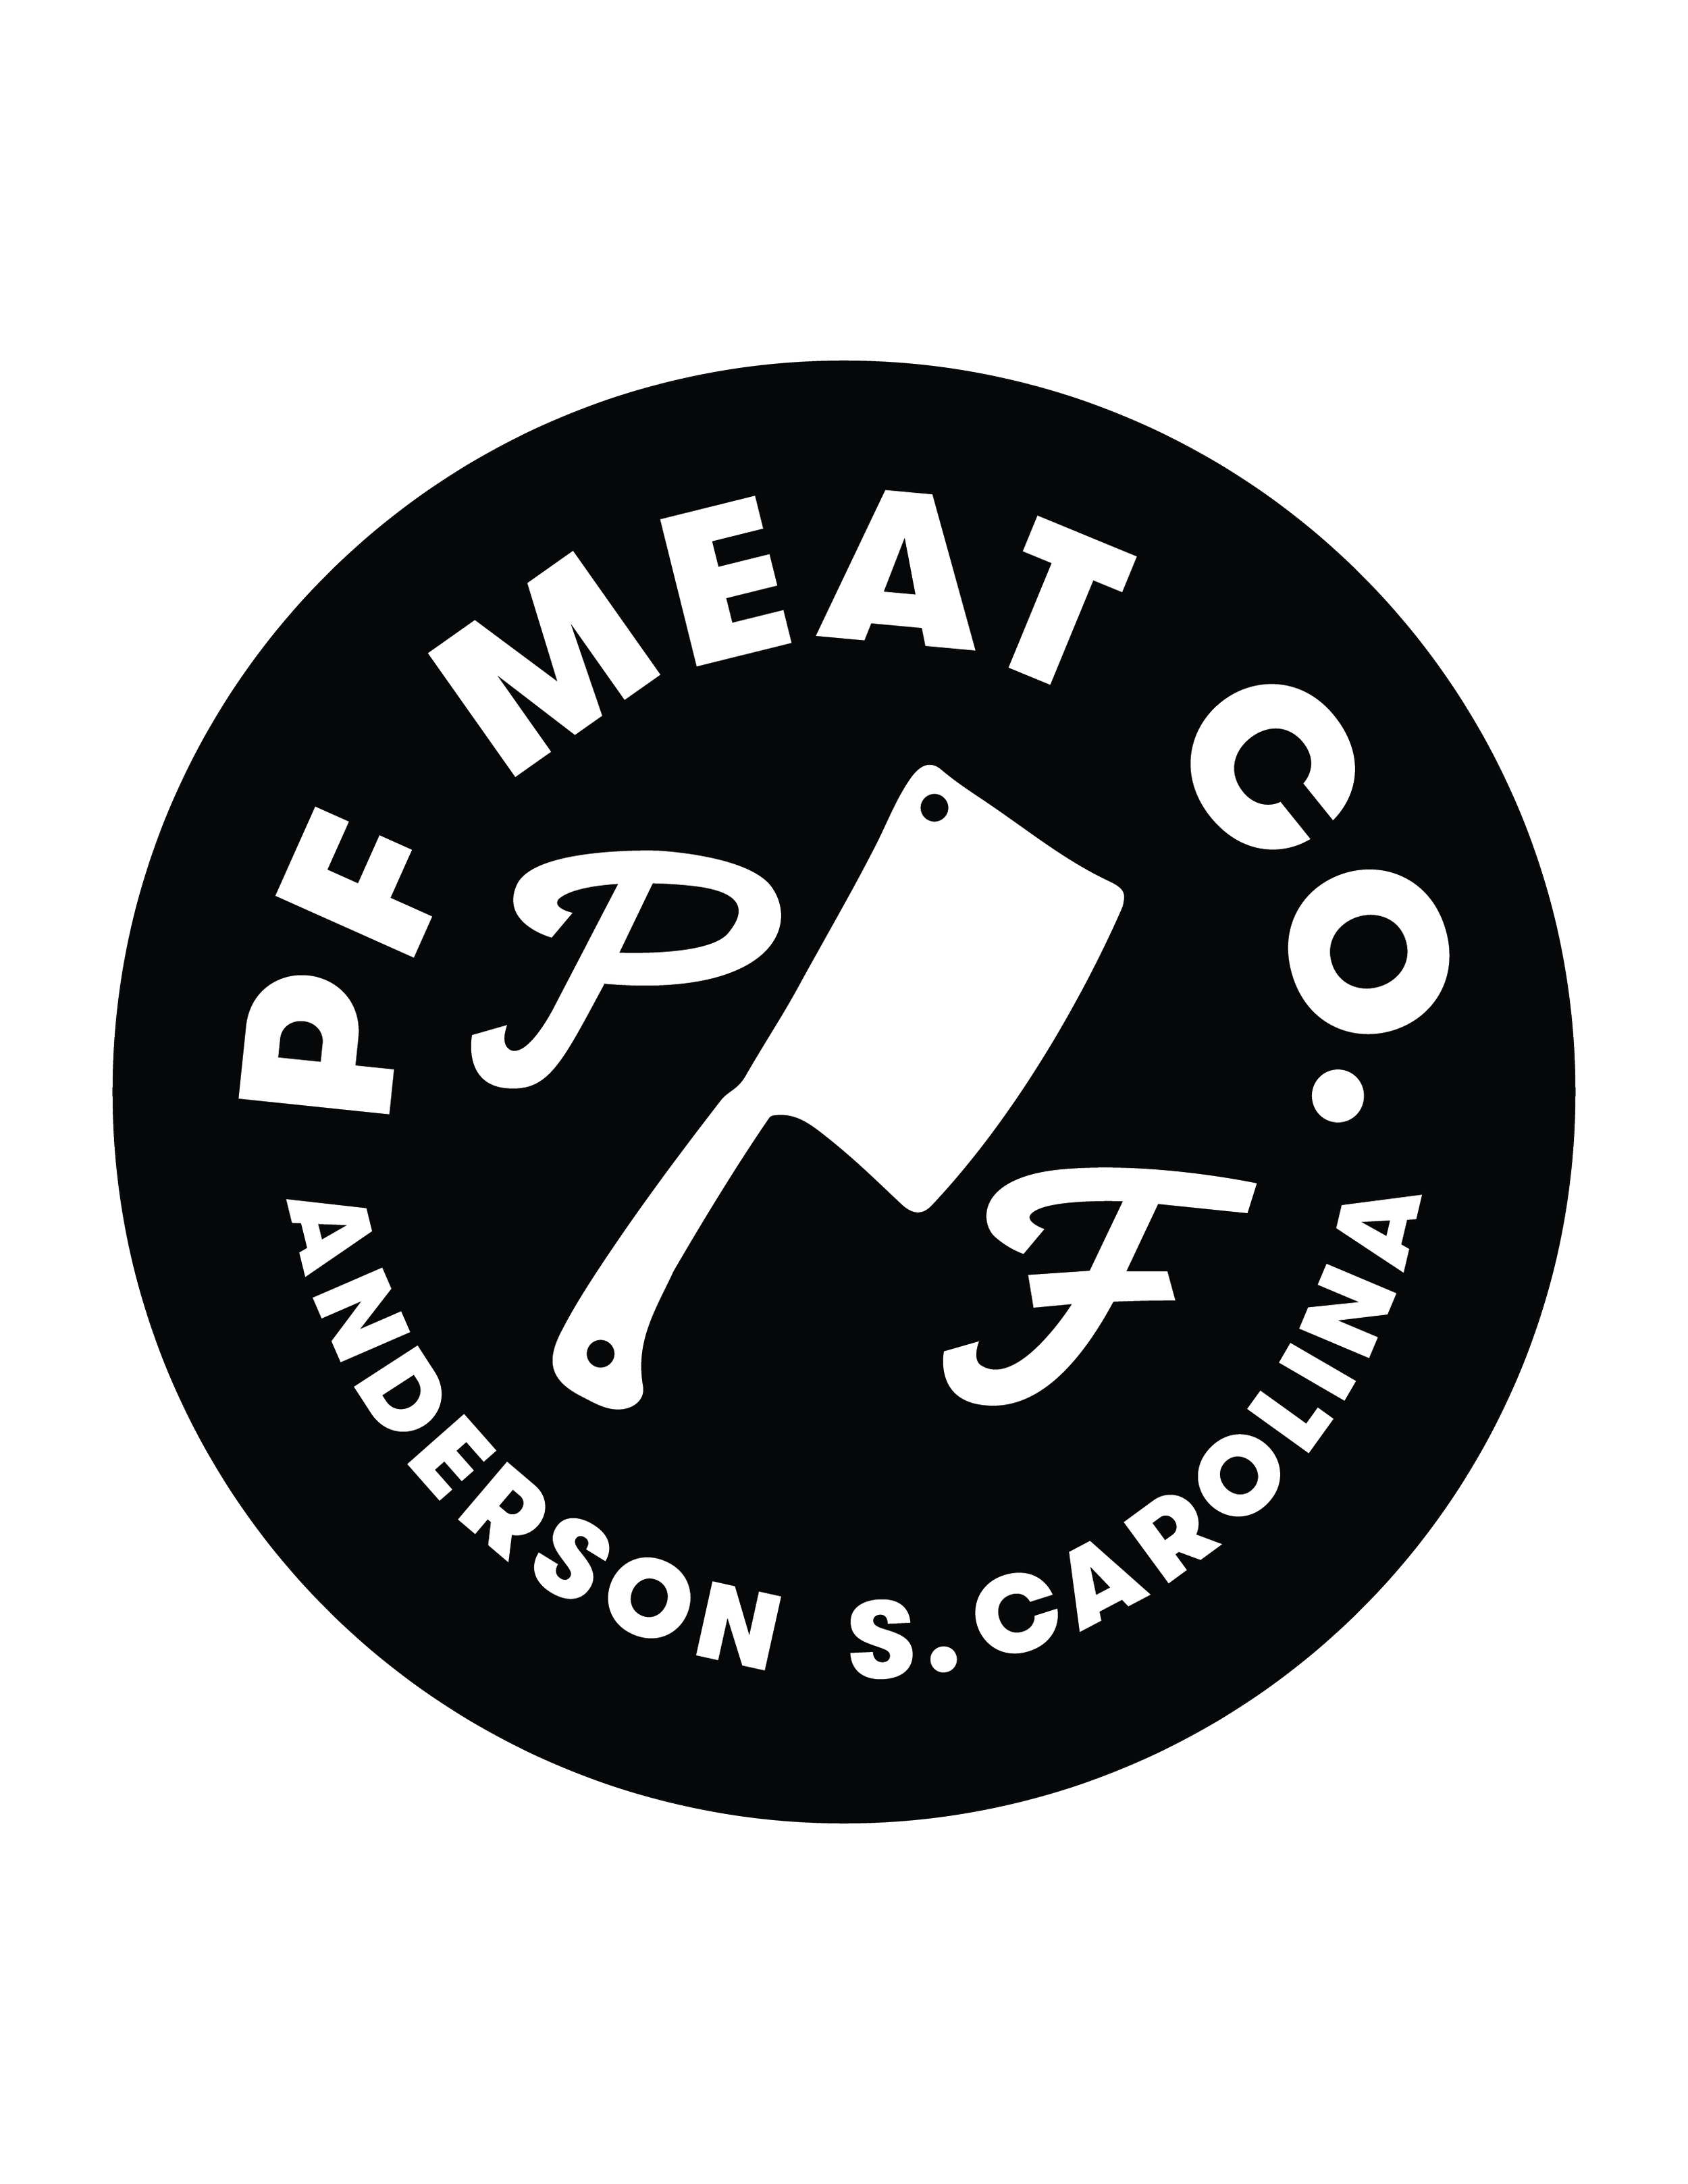 P and S Meats